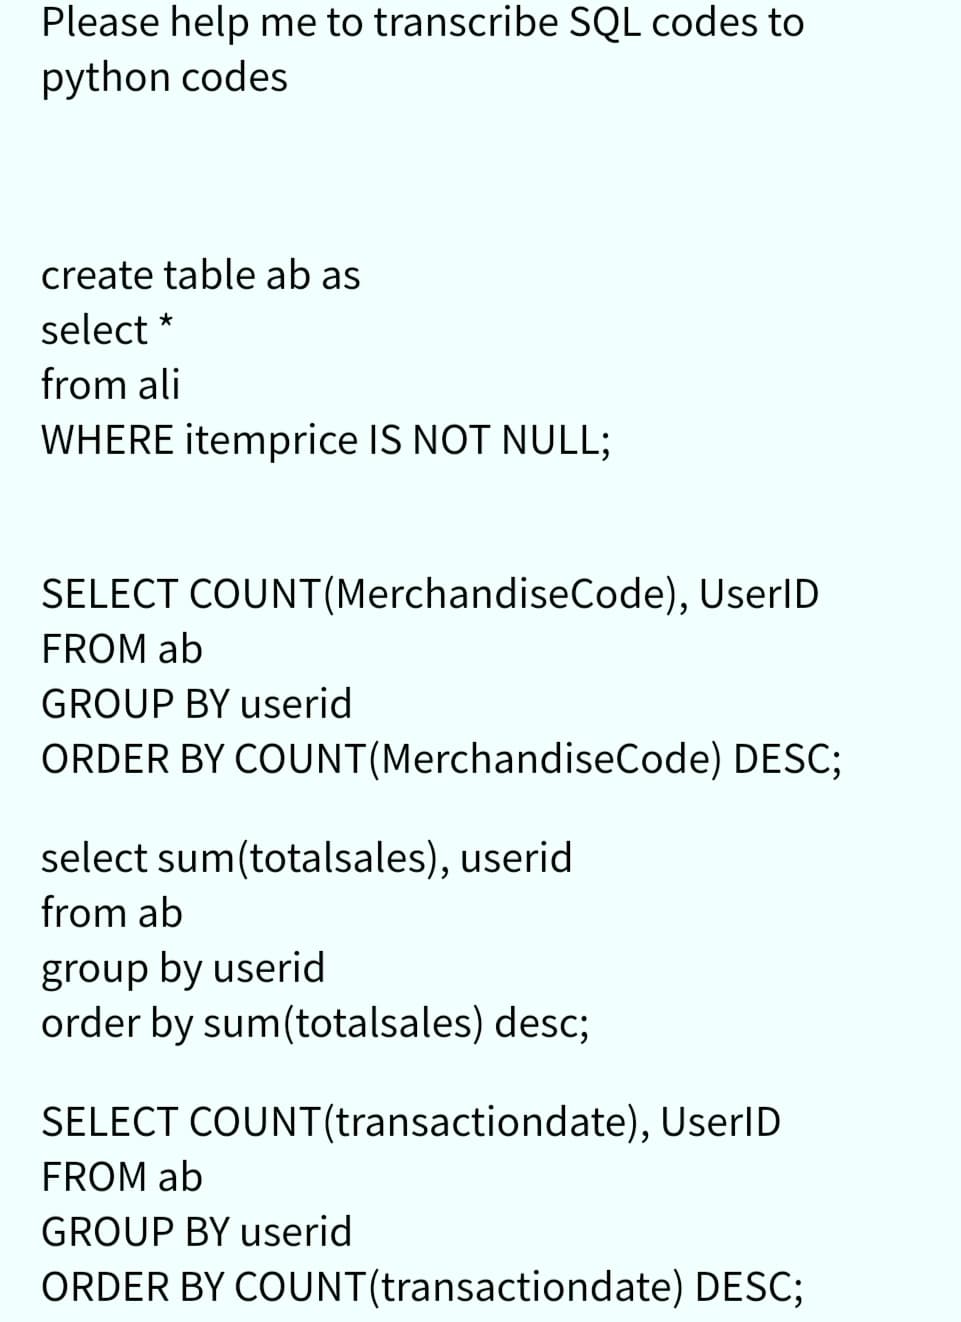 Please help me to transcribe SQL codes to
python codes
create table ab as
select *
from ali
WHERE itemprice IS NOT NULL;
SELECT COUNT(MerchandiseCode), UserID
FROM ab
GROUP BY userid
ORDER BY COUNT(MerchandiseCode) DESC;
select sum(totalsales), userid
from ab
group by userid
order by sum(totalsales) desc;
SELECT COUNT(transactiondate), UserID
FROM ab
GROUP BY userid
ORDER BY COUNT(transactiondate) DESC;
